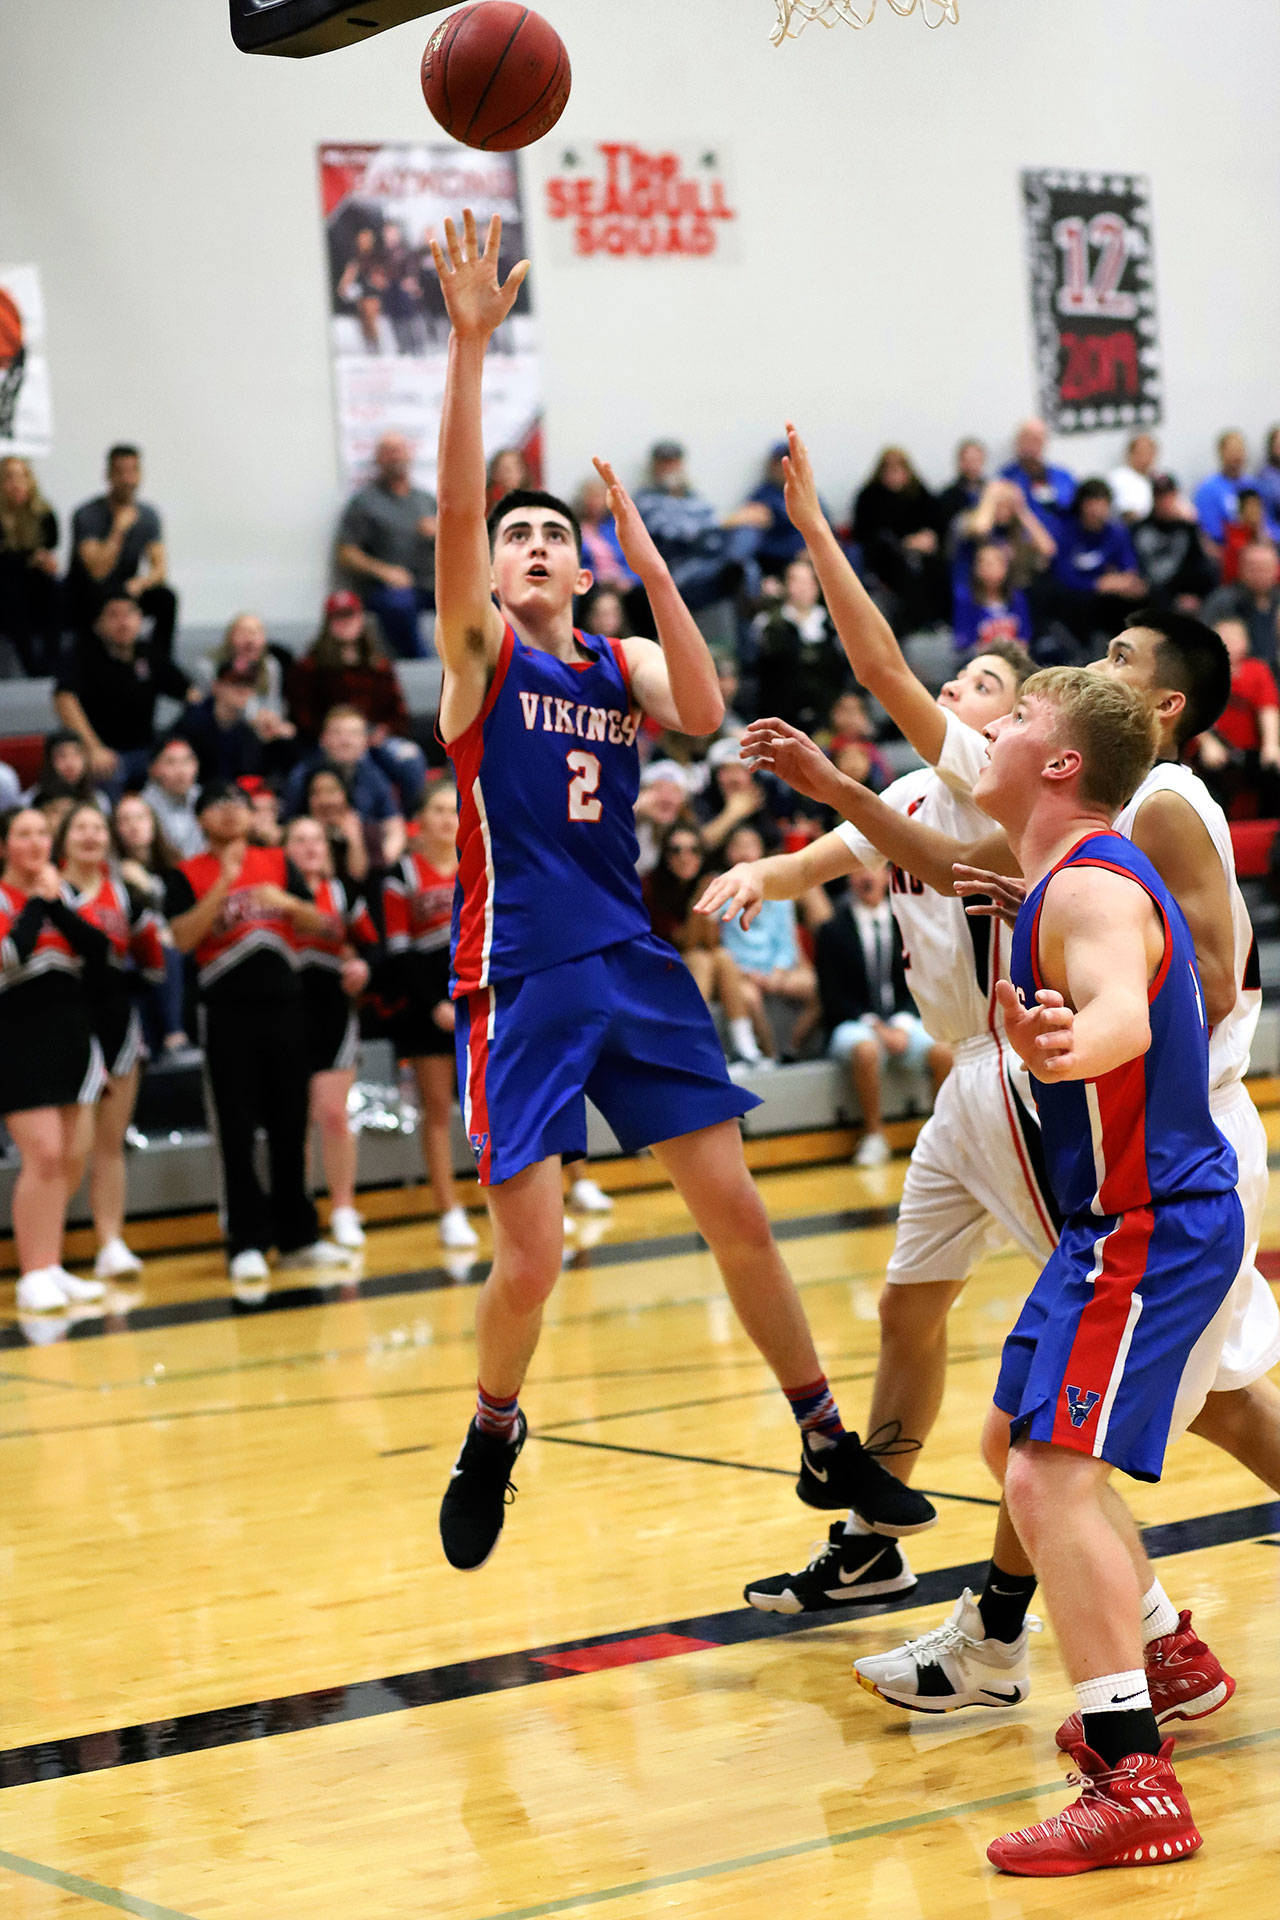 Willapa Valley’s Logan Walker puts up a shot during Friday’s game against Raymond at Raymond High School. (Photo by Larry Bale)